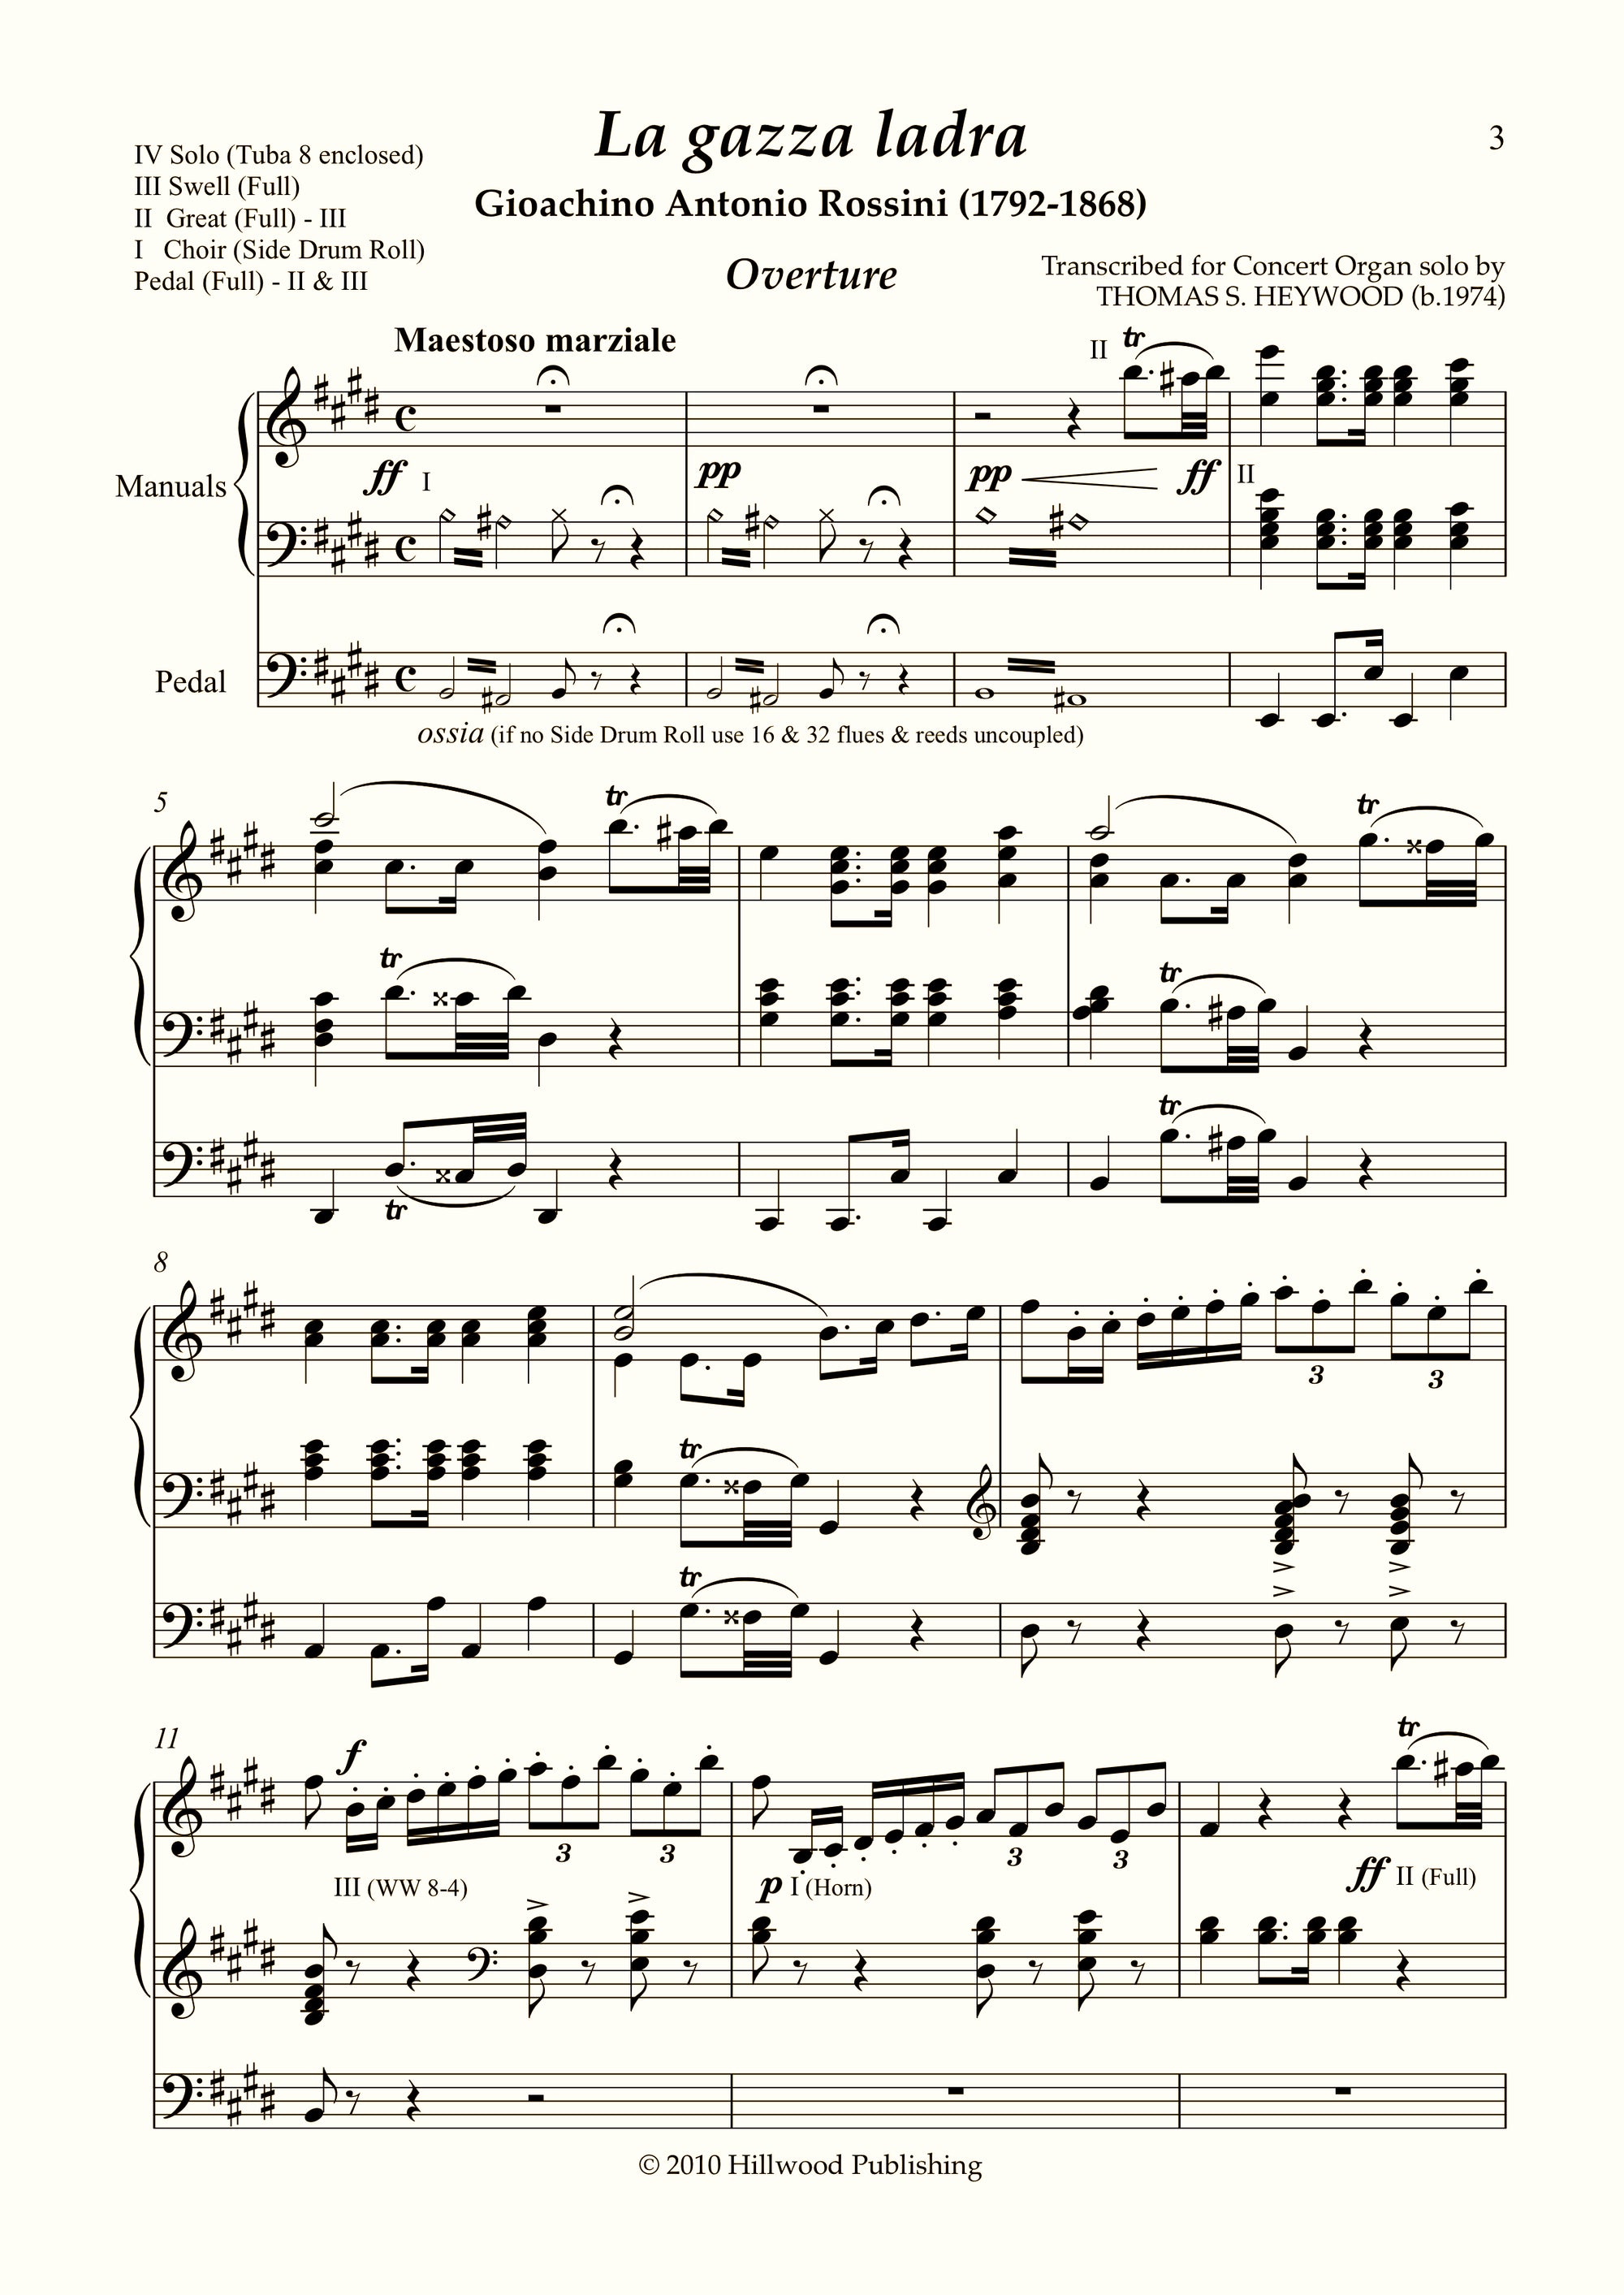 Rossini/Heywood - Overture to The Thieving Magpie (Score) - Concert Organ International